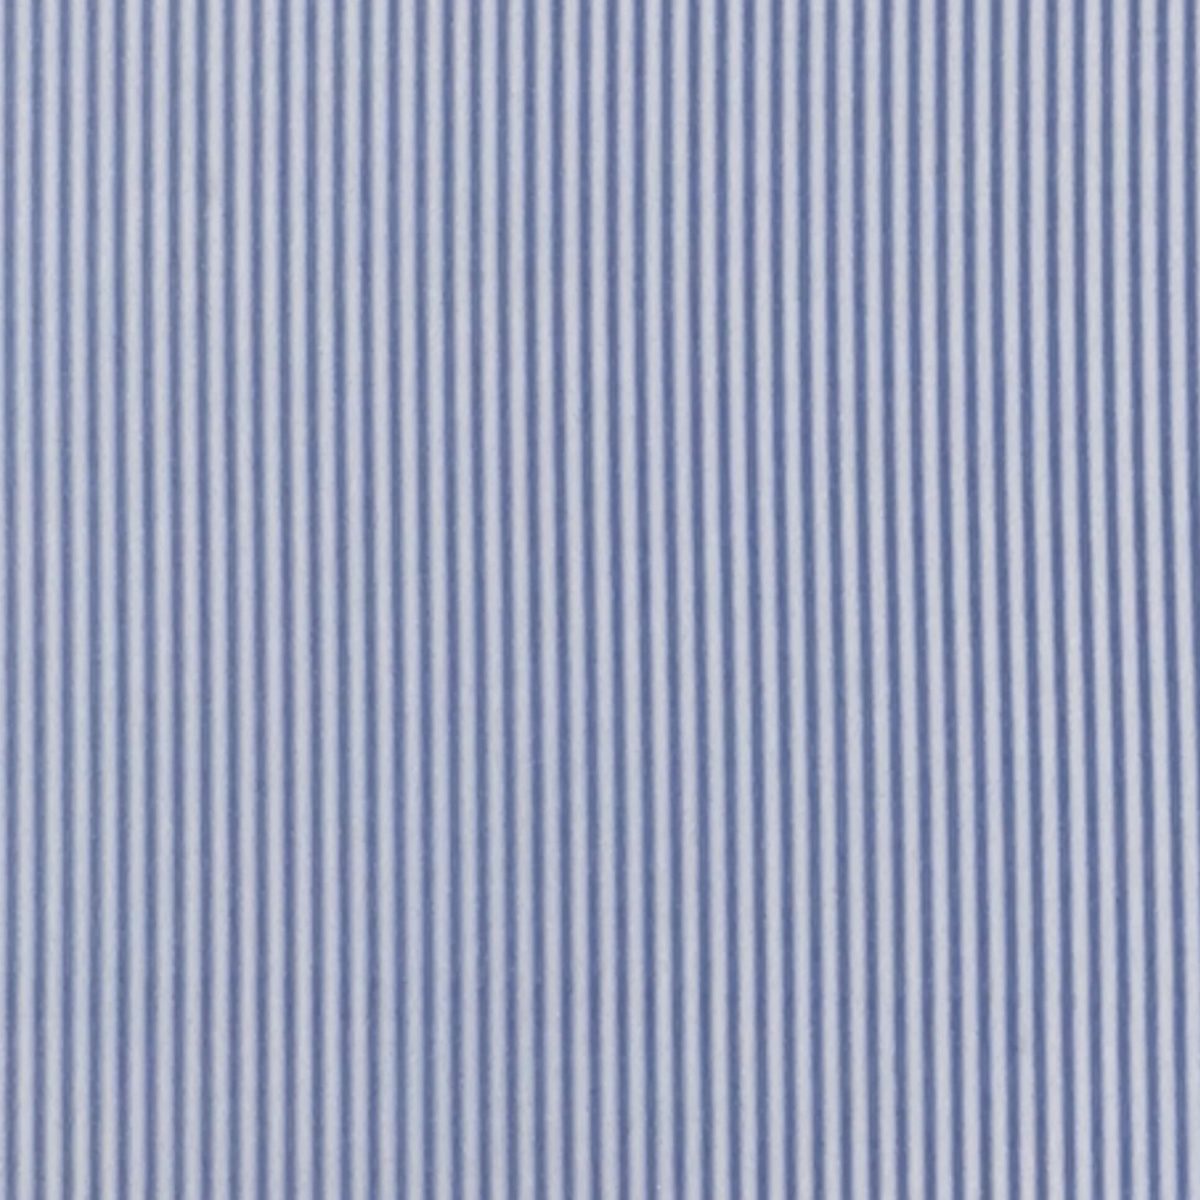 Fabric-Swatch-Cotton-Stripes-Blue-and-White-Cotton